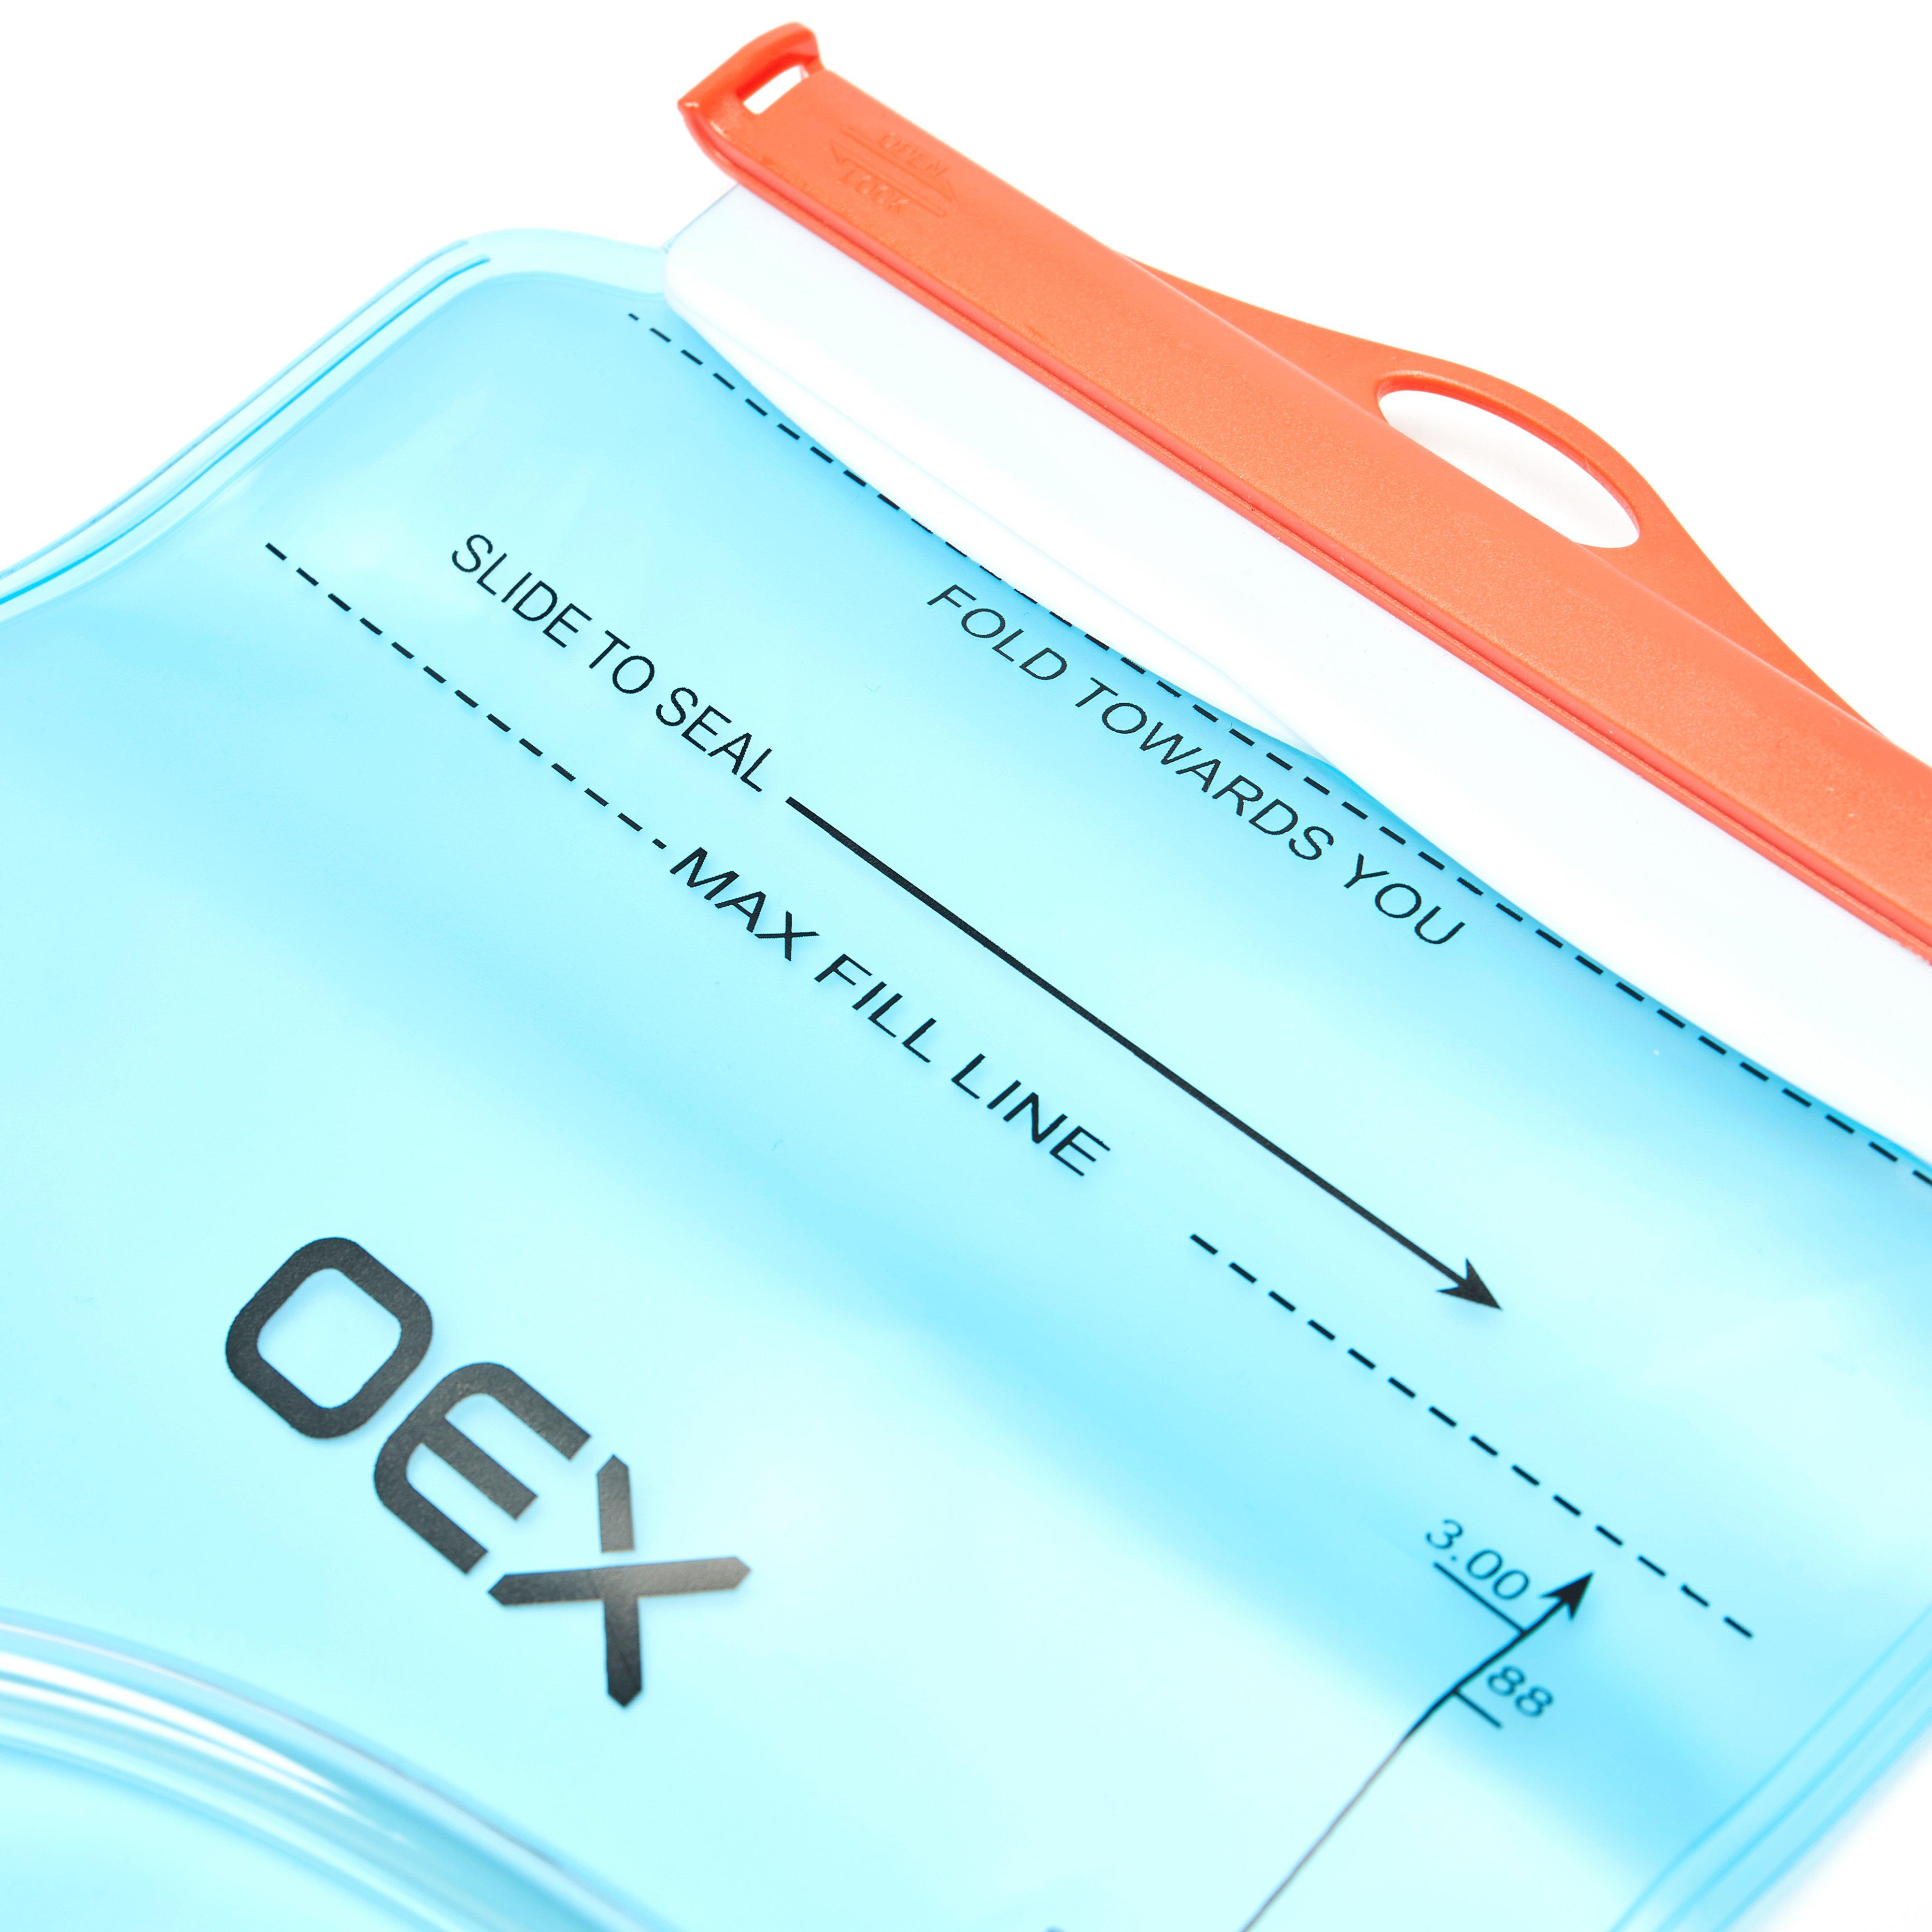 OEX Hydration Bladder (3 Litres) Review